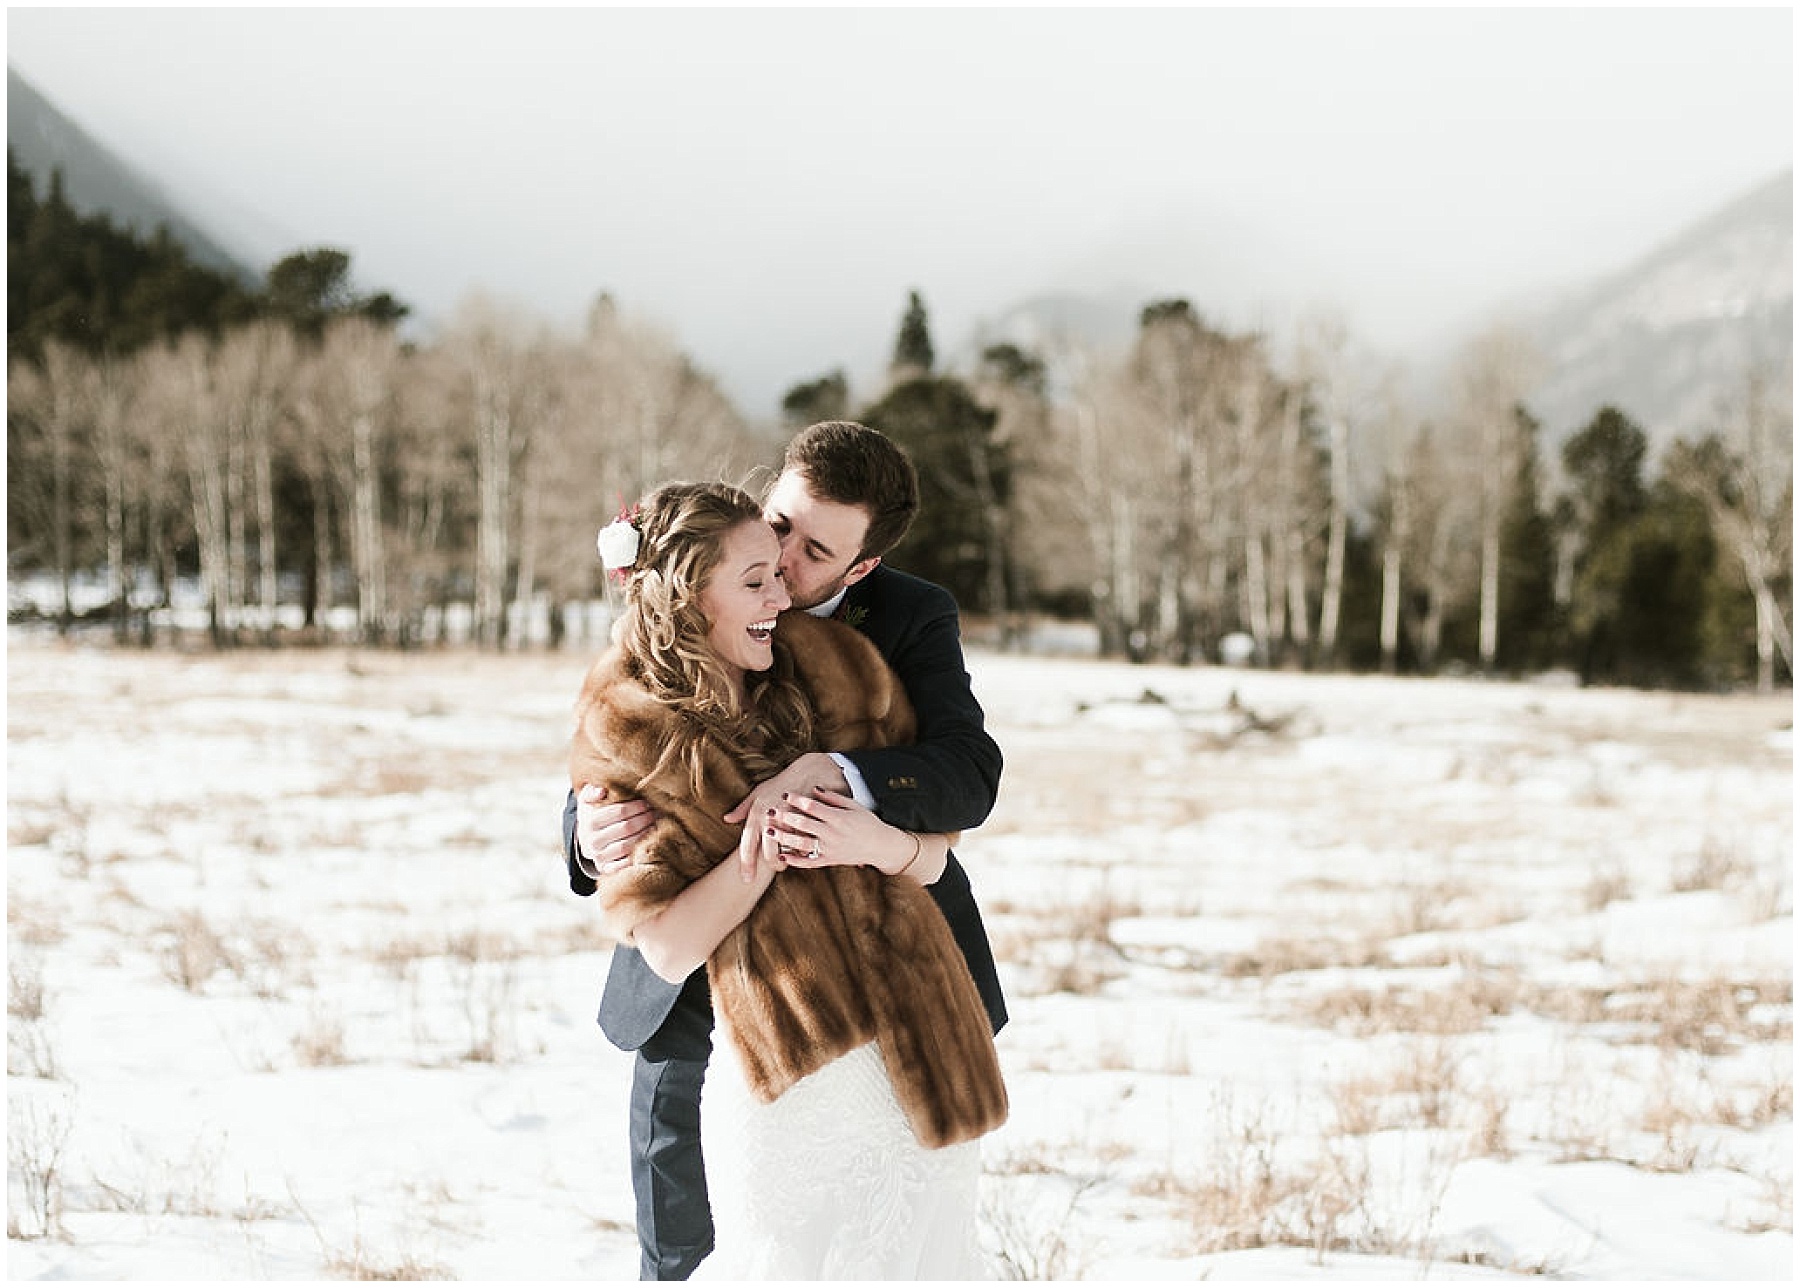 Katesalleyphotography-119_Haley and Dan get married in Estes Park.jpg